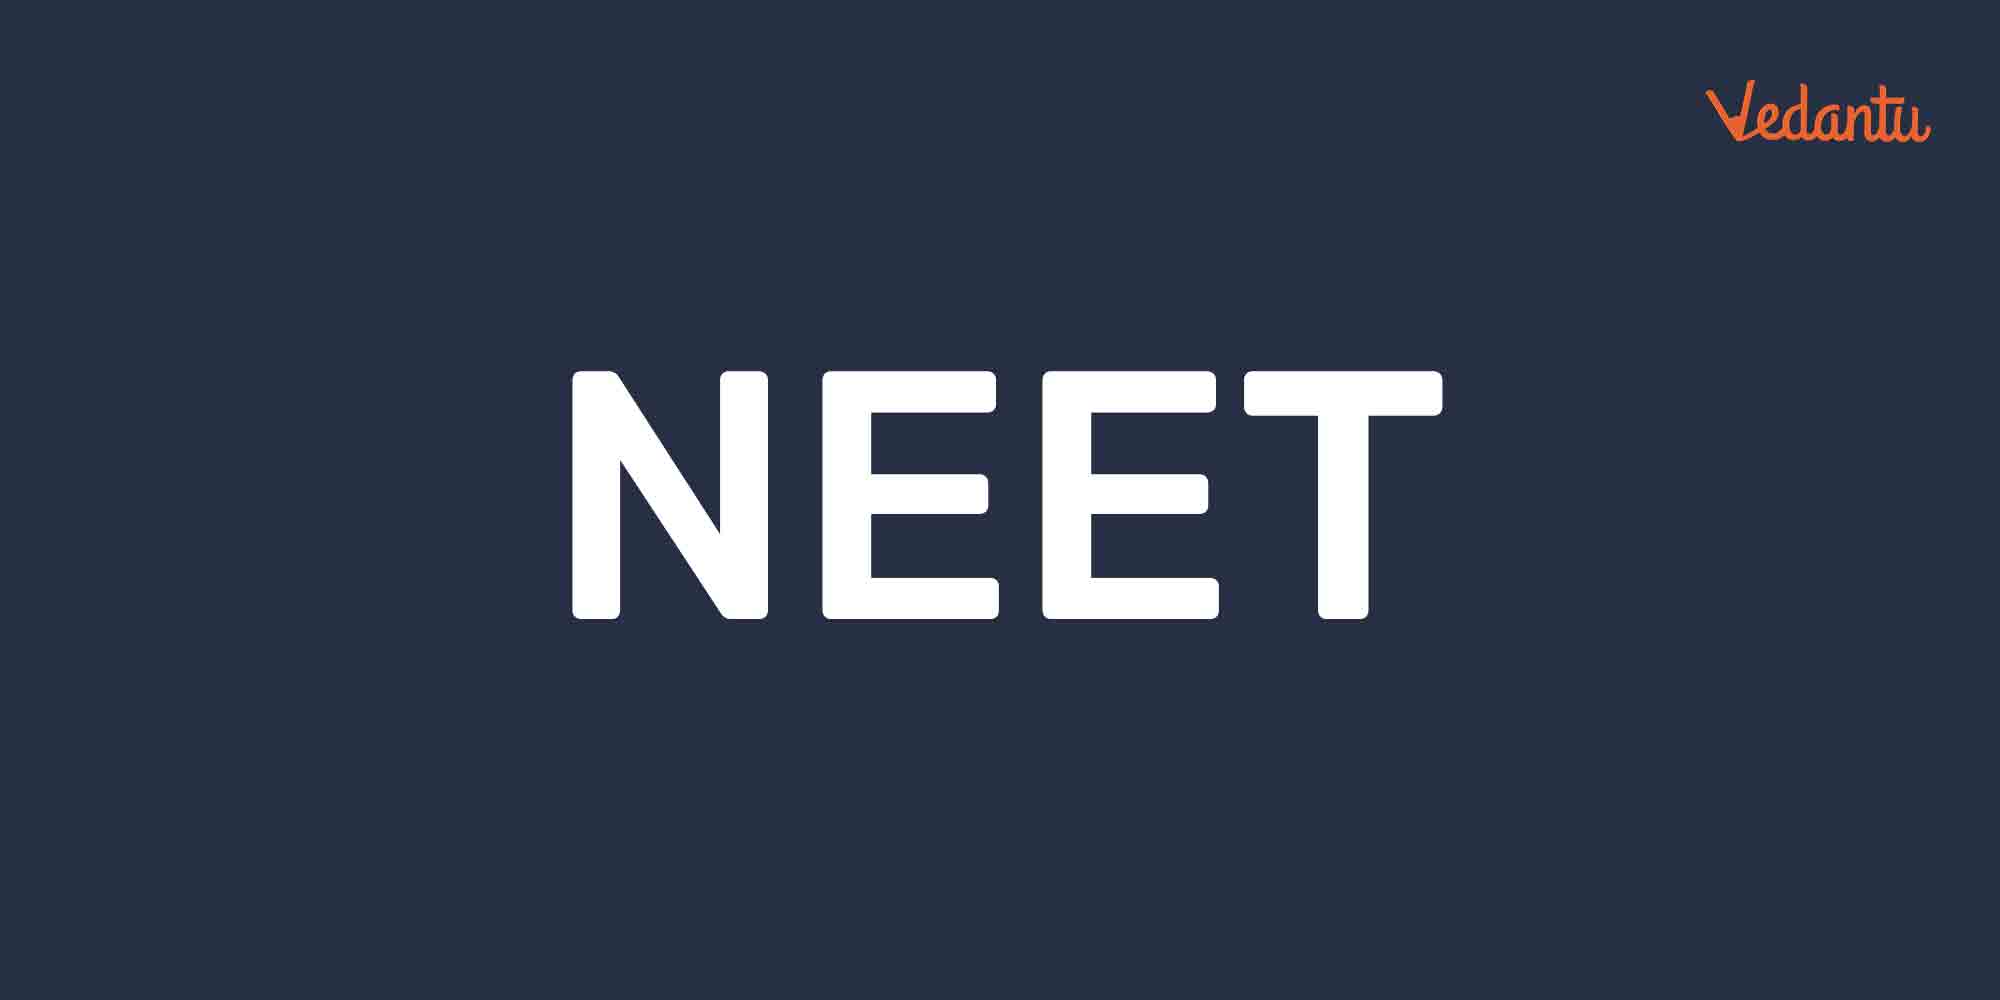 How To Prepare For NEET 2020 In 3 Months